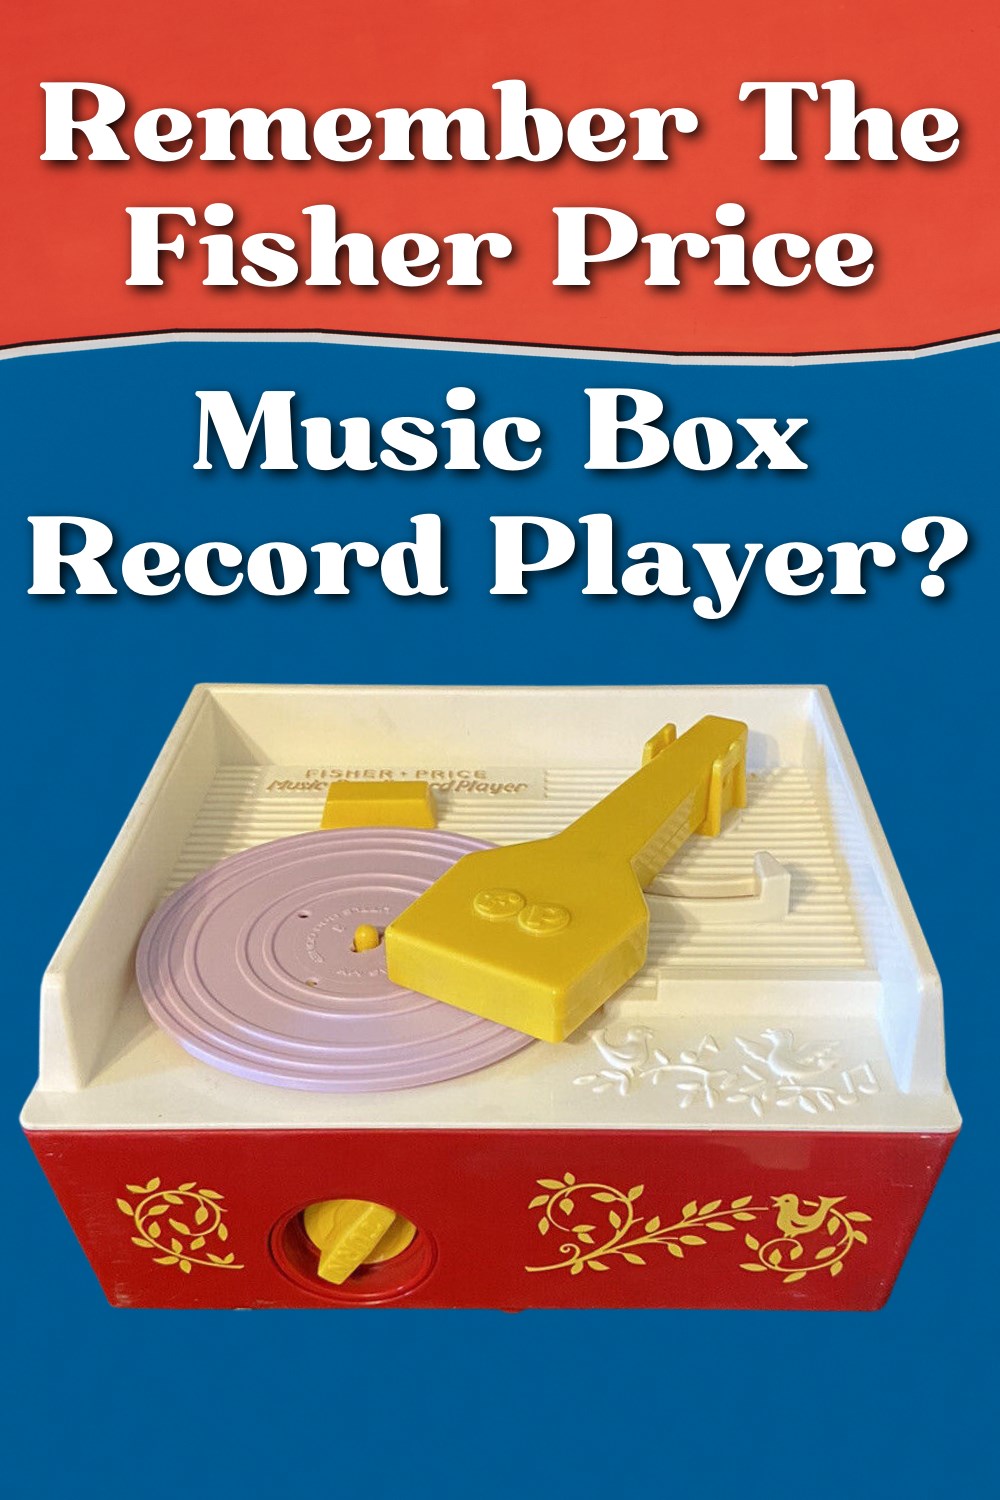 History of the Fisher Price Music Box Record Player